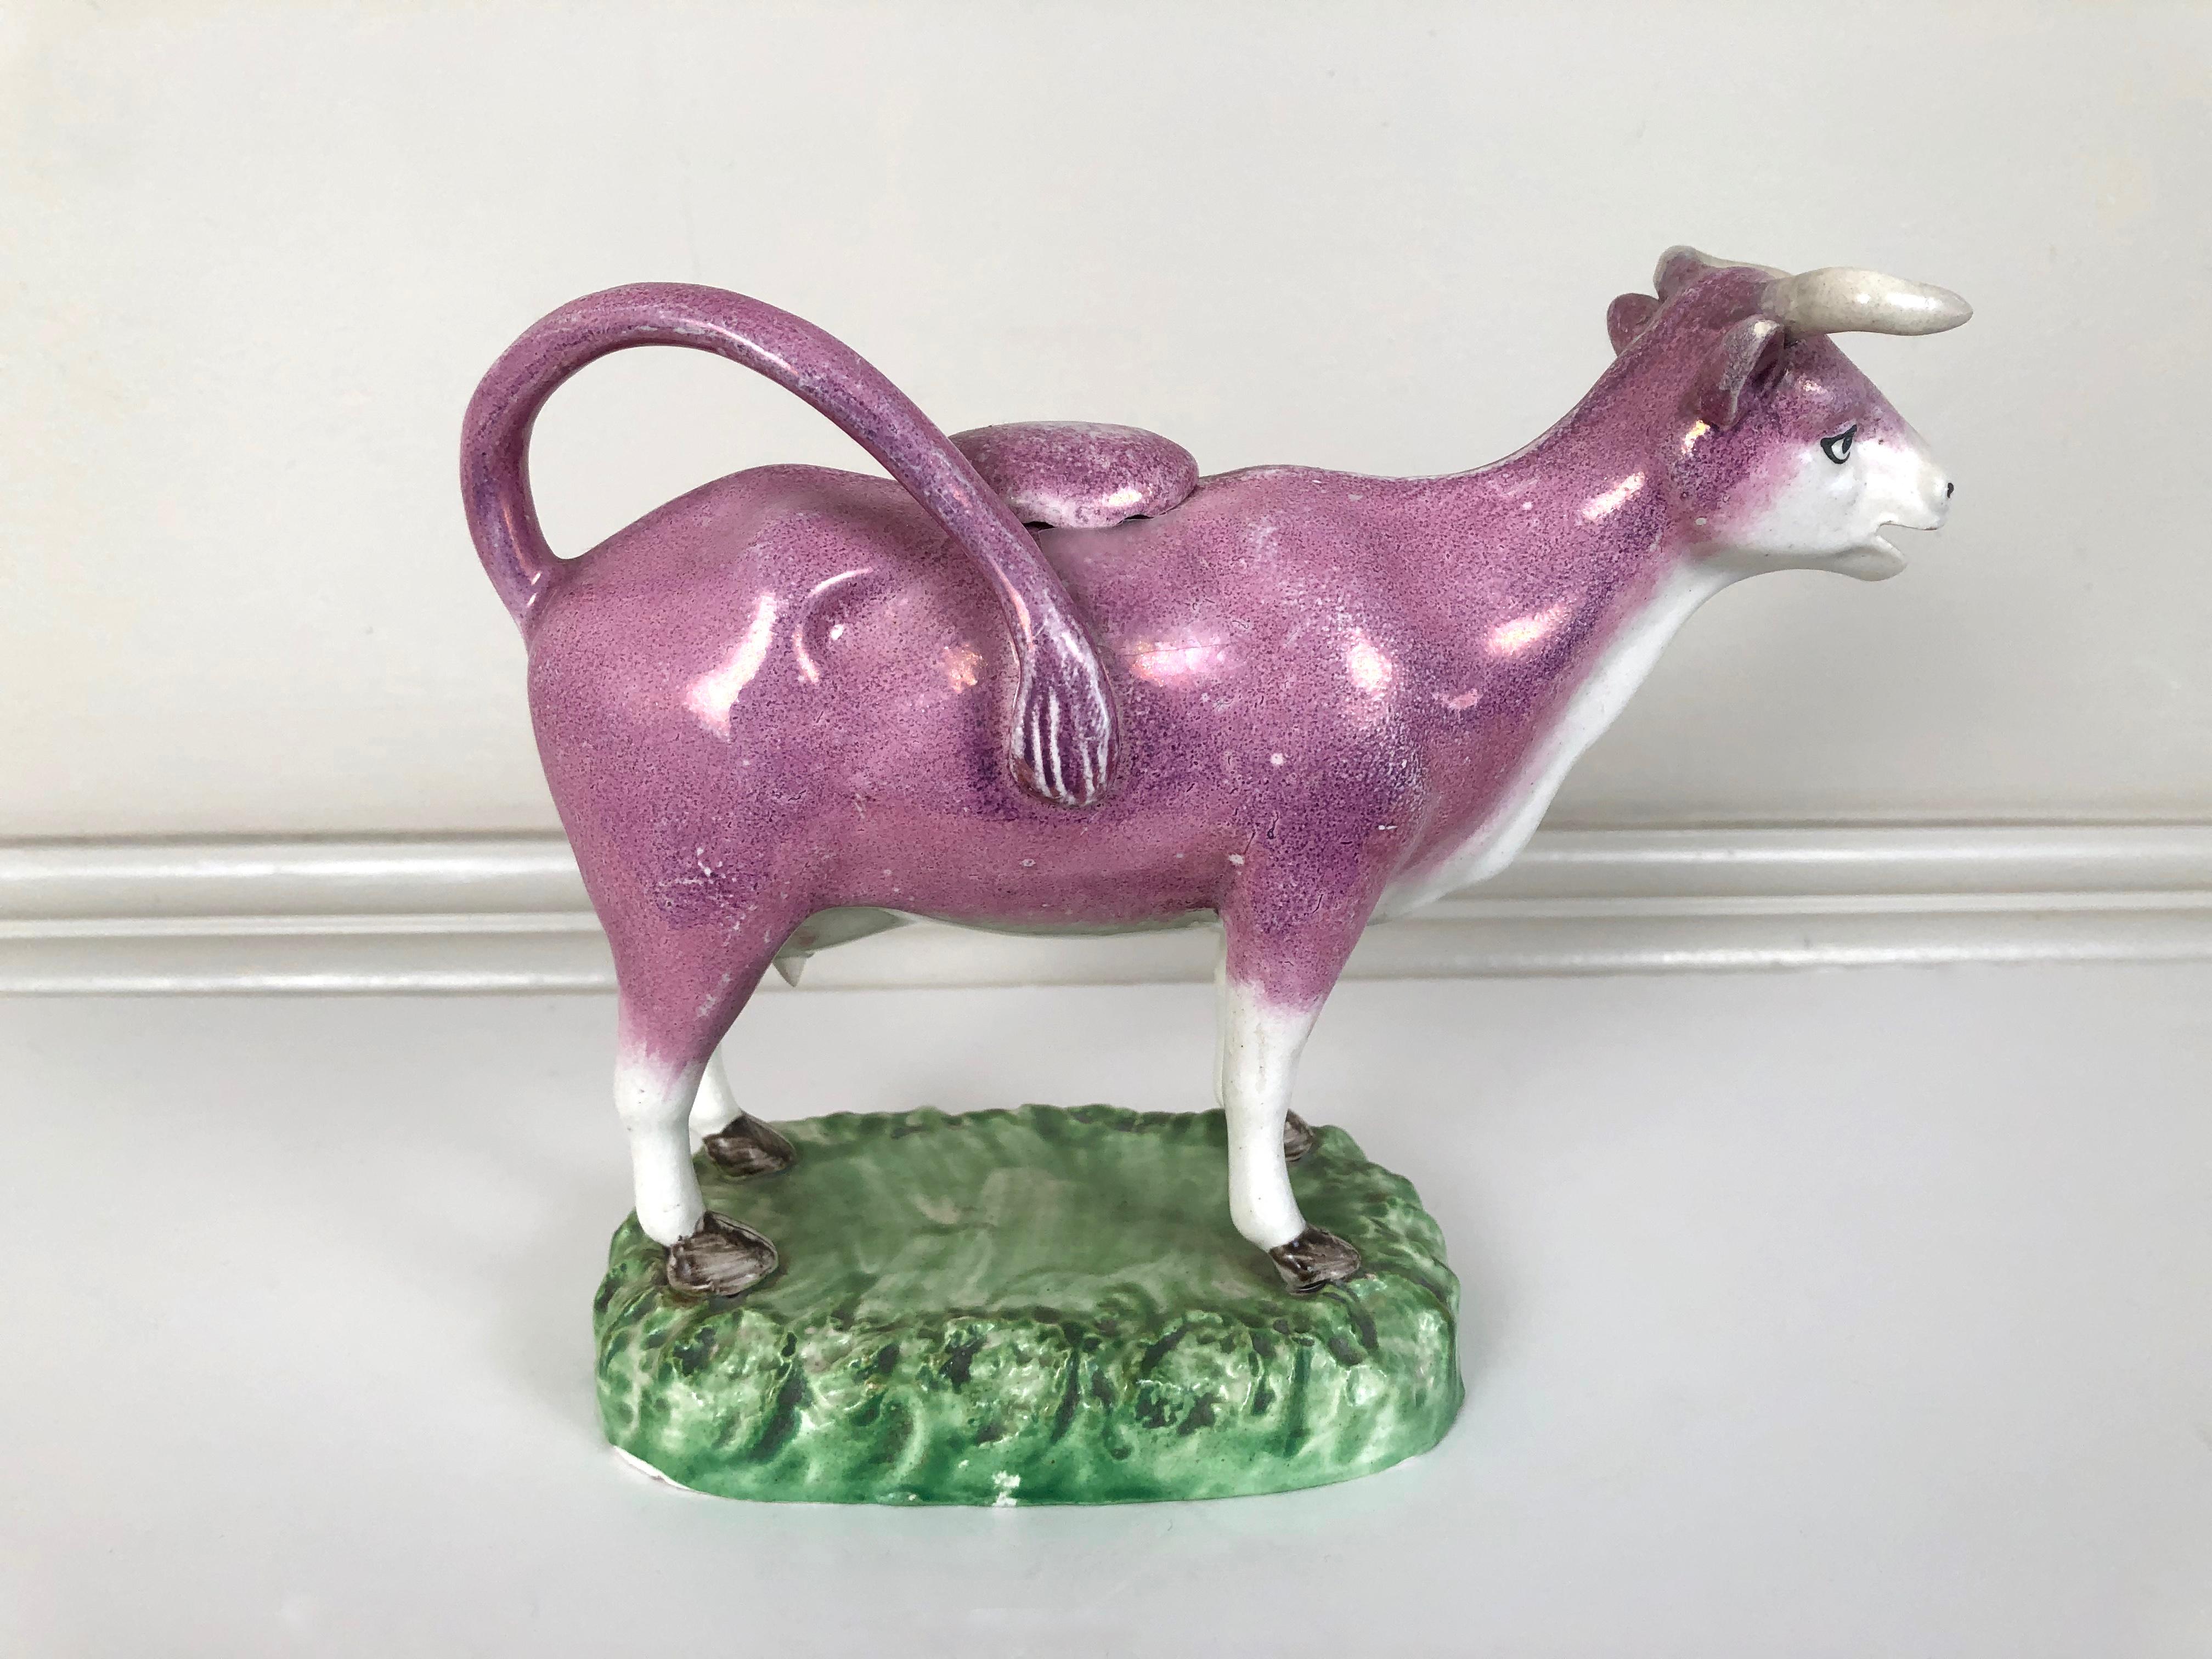 A fine quality Staffordshire pottery pink lustreware cow creamer and cover, modeled as an animated cow, standing with alert, happy expression standing on a green grassy base, English, circa 1820.